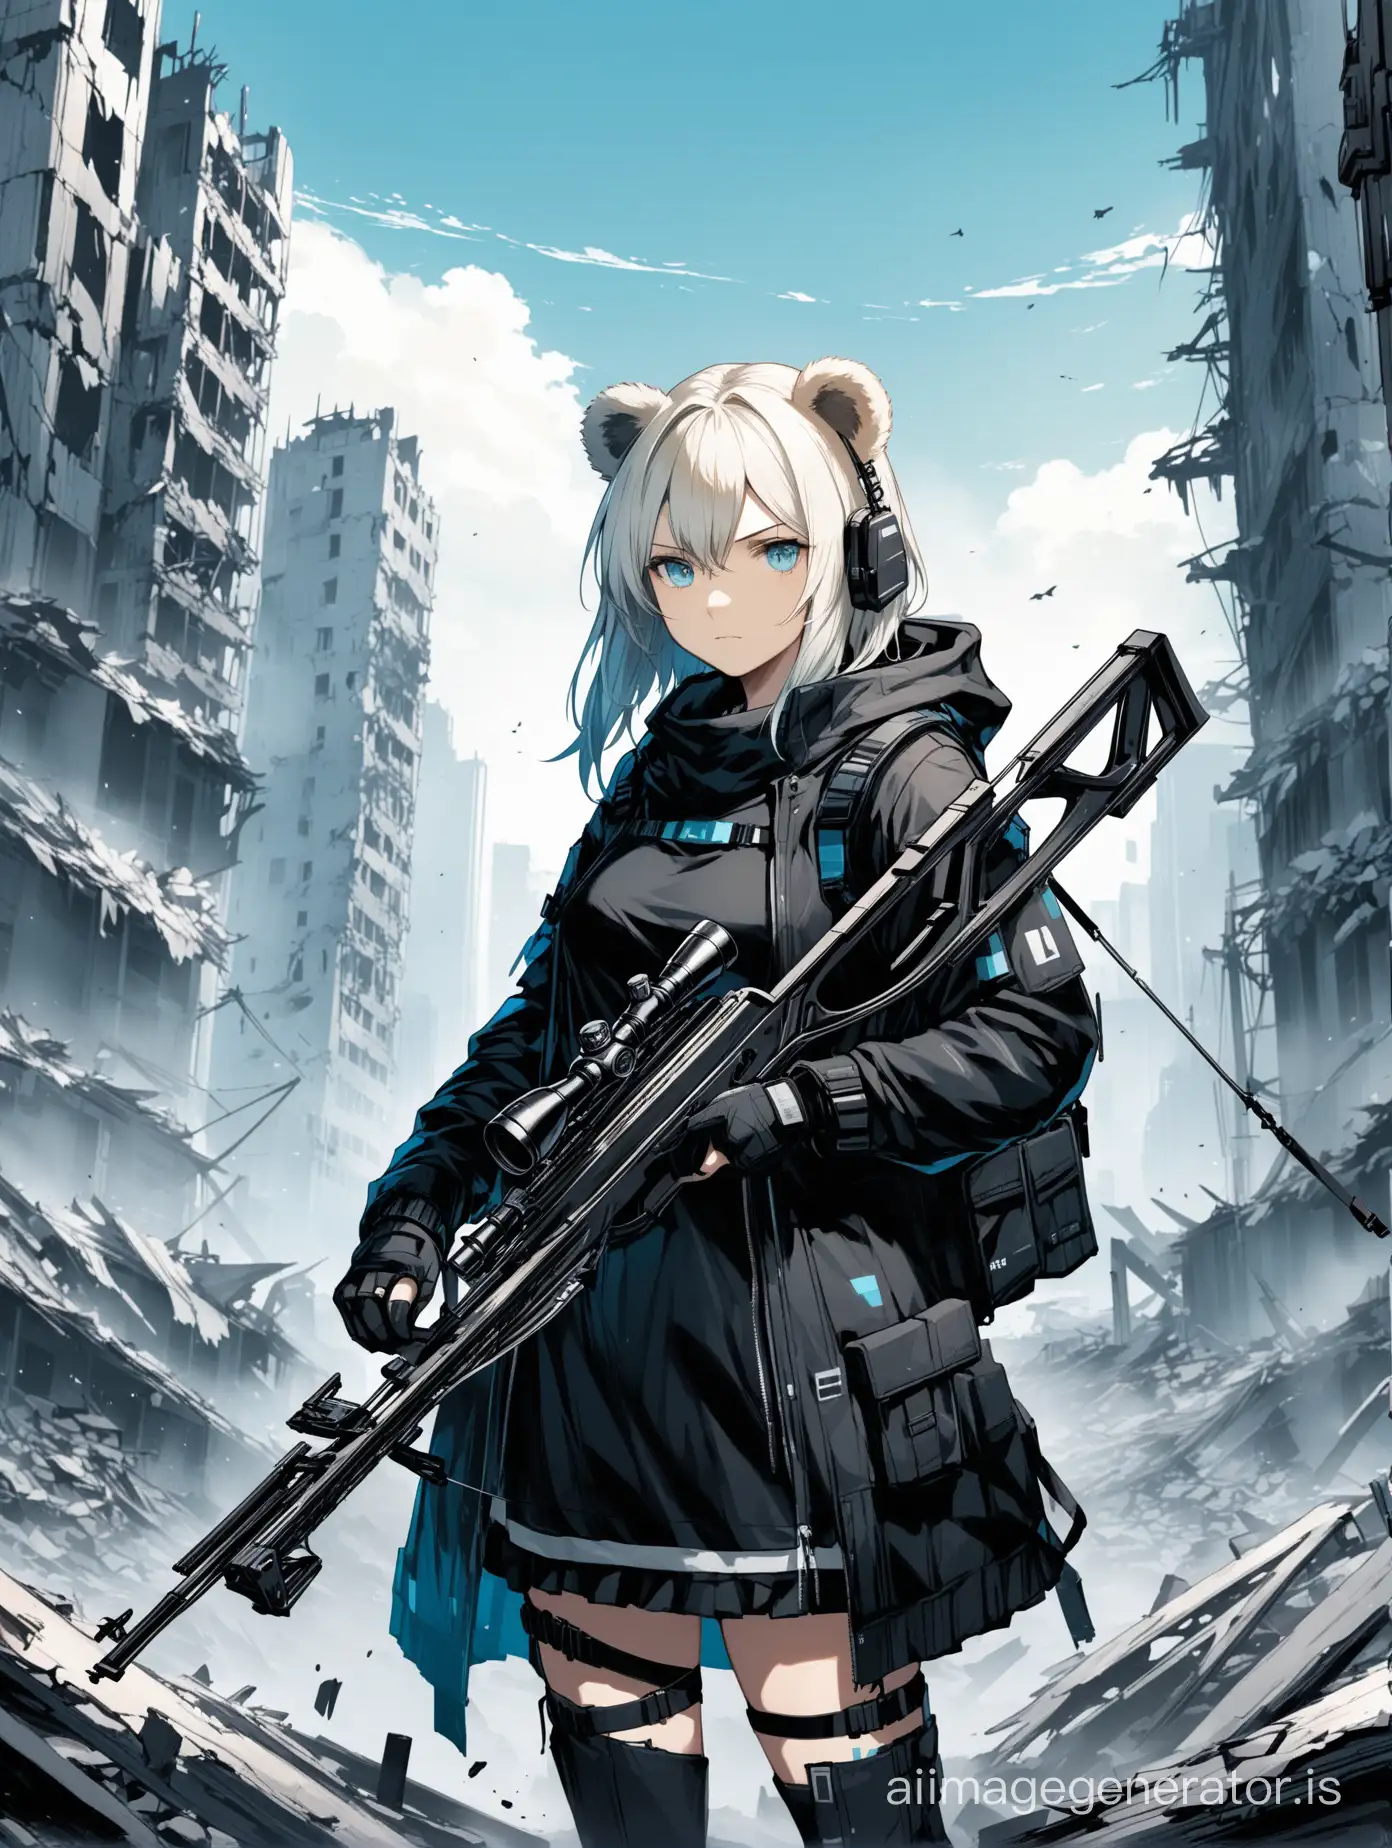 Ursus-Girl-with-Crossbow-Amidst-Ruined-Cityscape